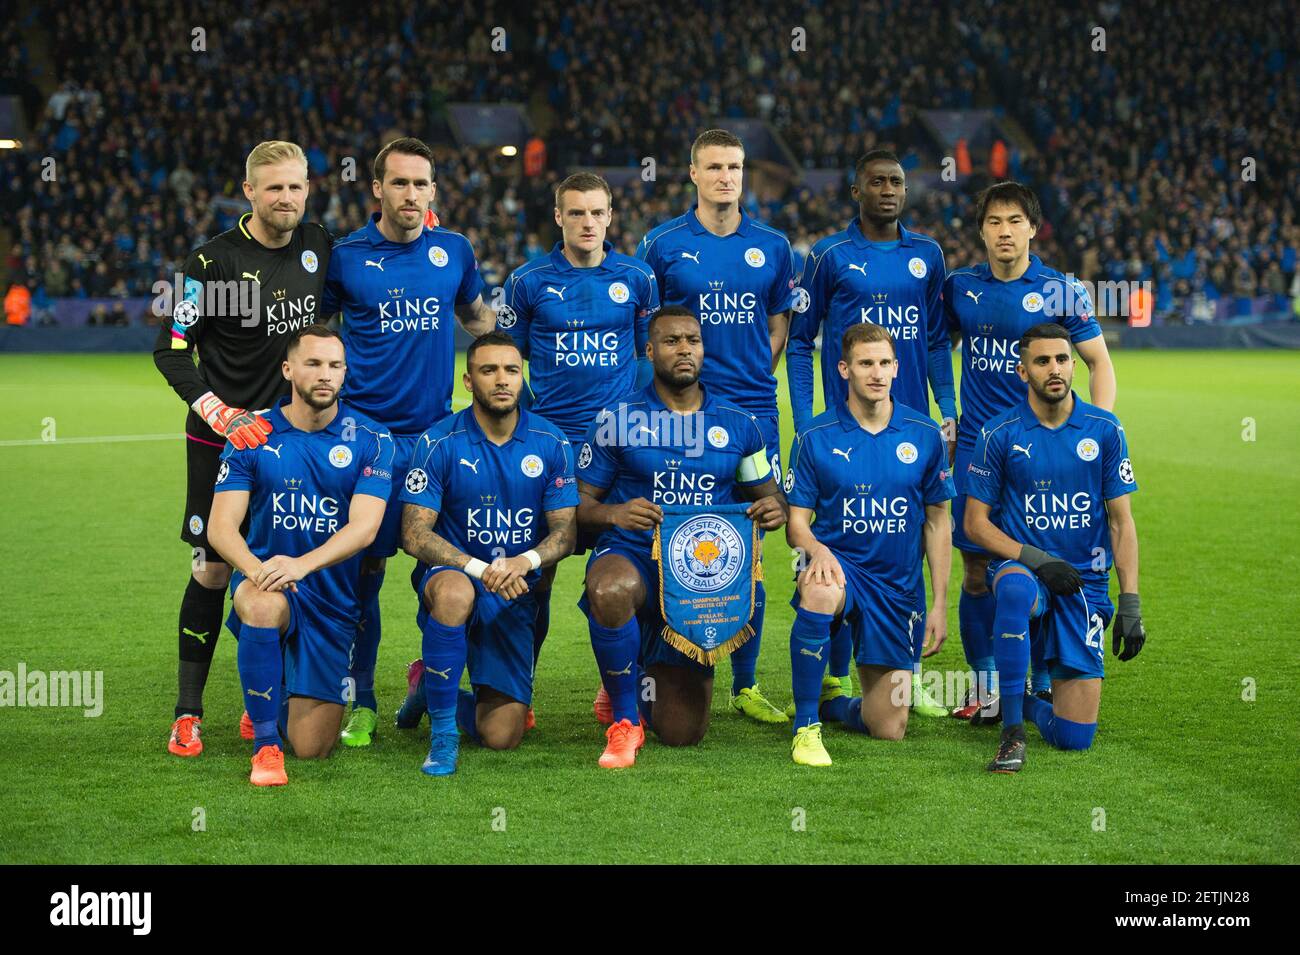 SP)BRITAIN-LEICESTER-CHAMPIONS LEAGUE-ROUND OF 16-LEICESTER CITY V SEVILLA  FC (170314) -- LEICESTER, Mar. 14, 2017 (Xinhua) -- Leicester City Football  team pose for team group photo ahead of the match during the round